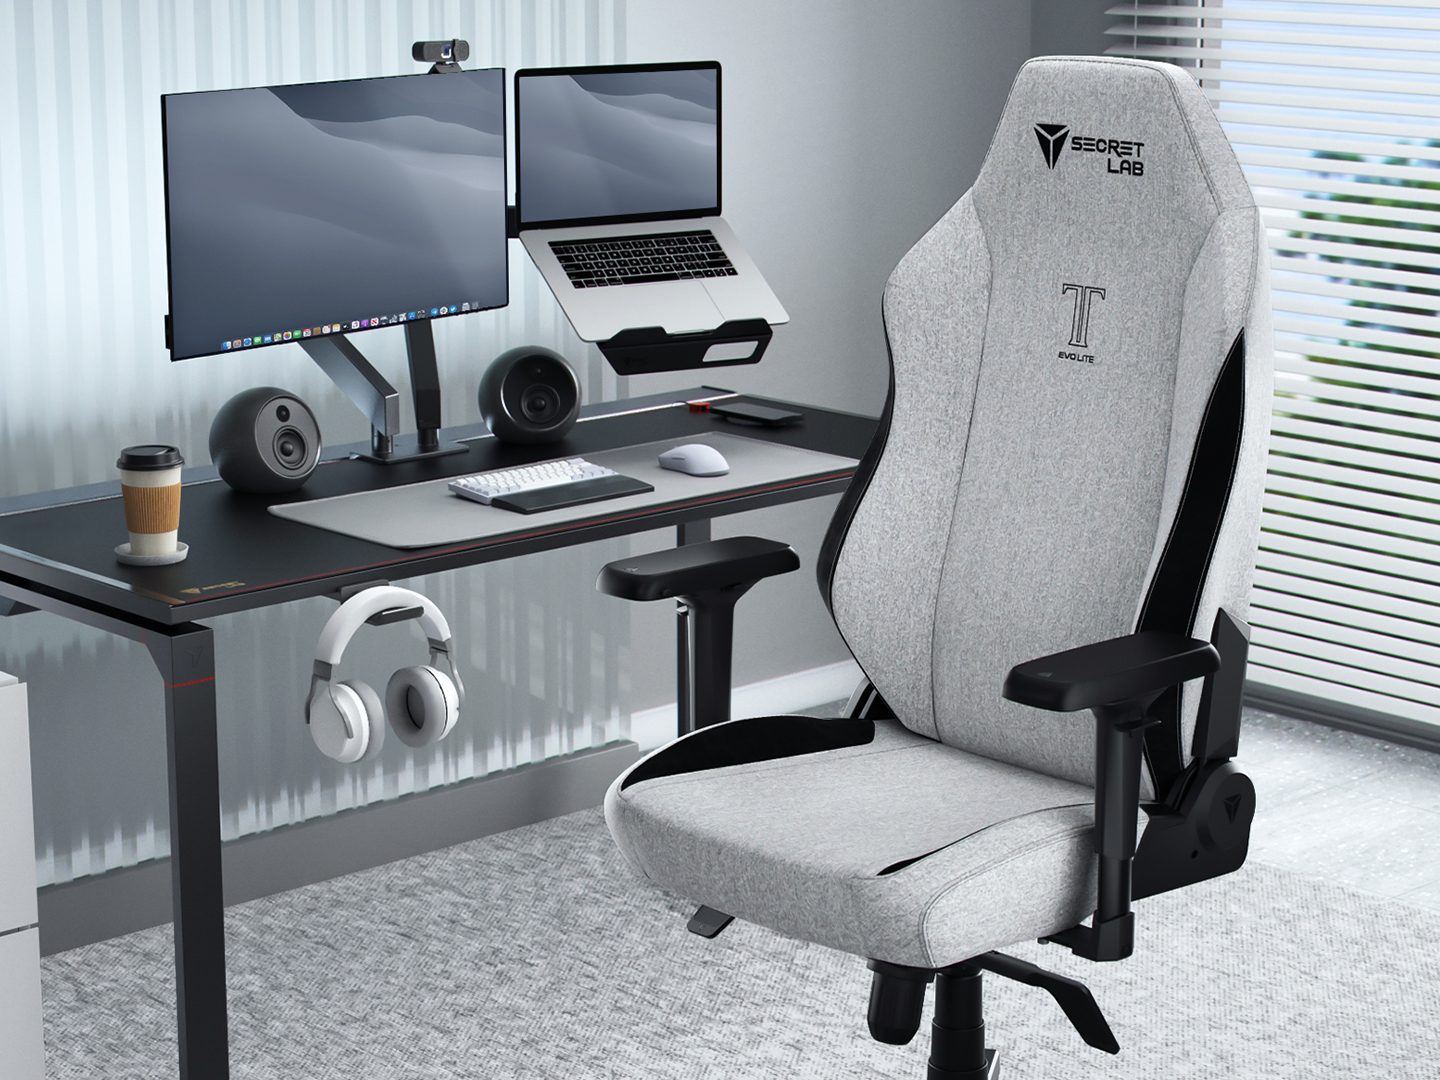 Secretlab's latest gaming chair, the Titan Evo Lite, in front of a gaming PC setup.